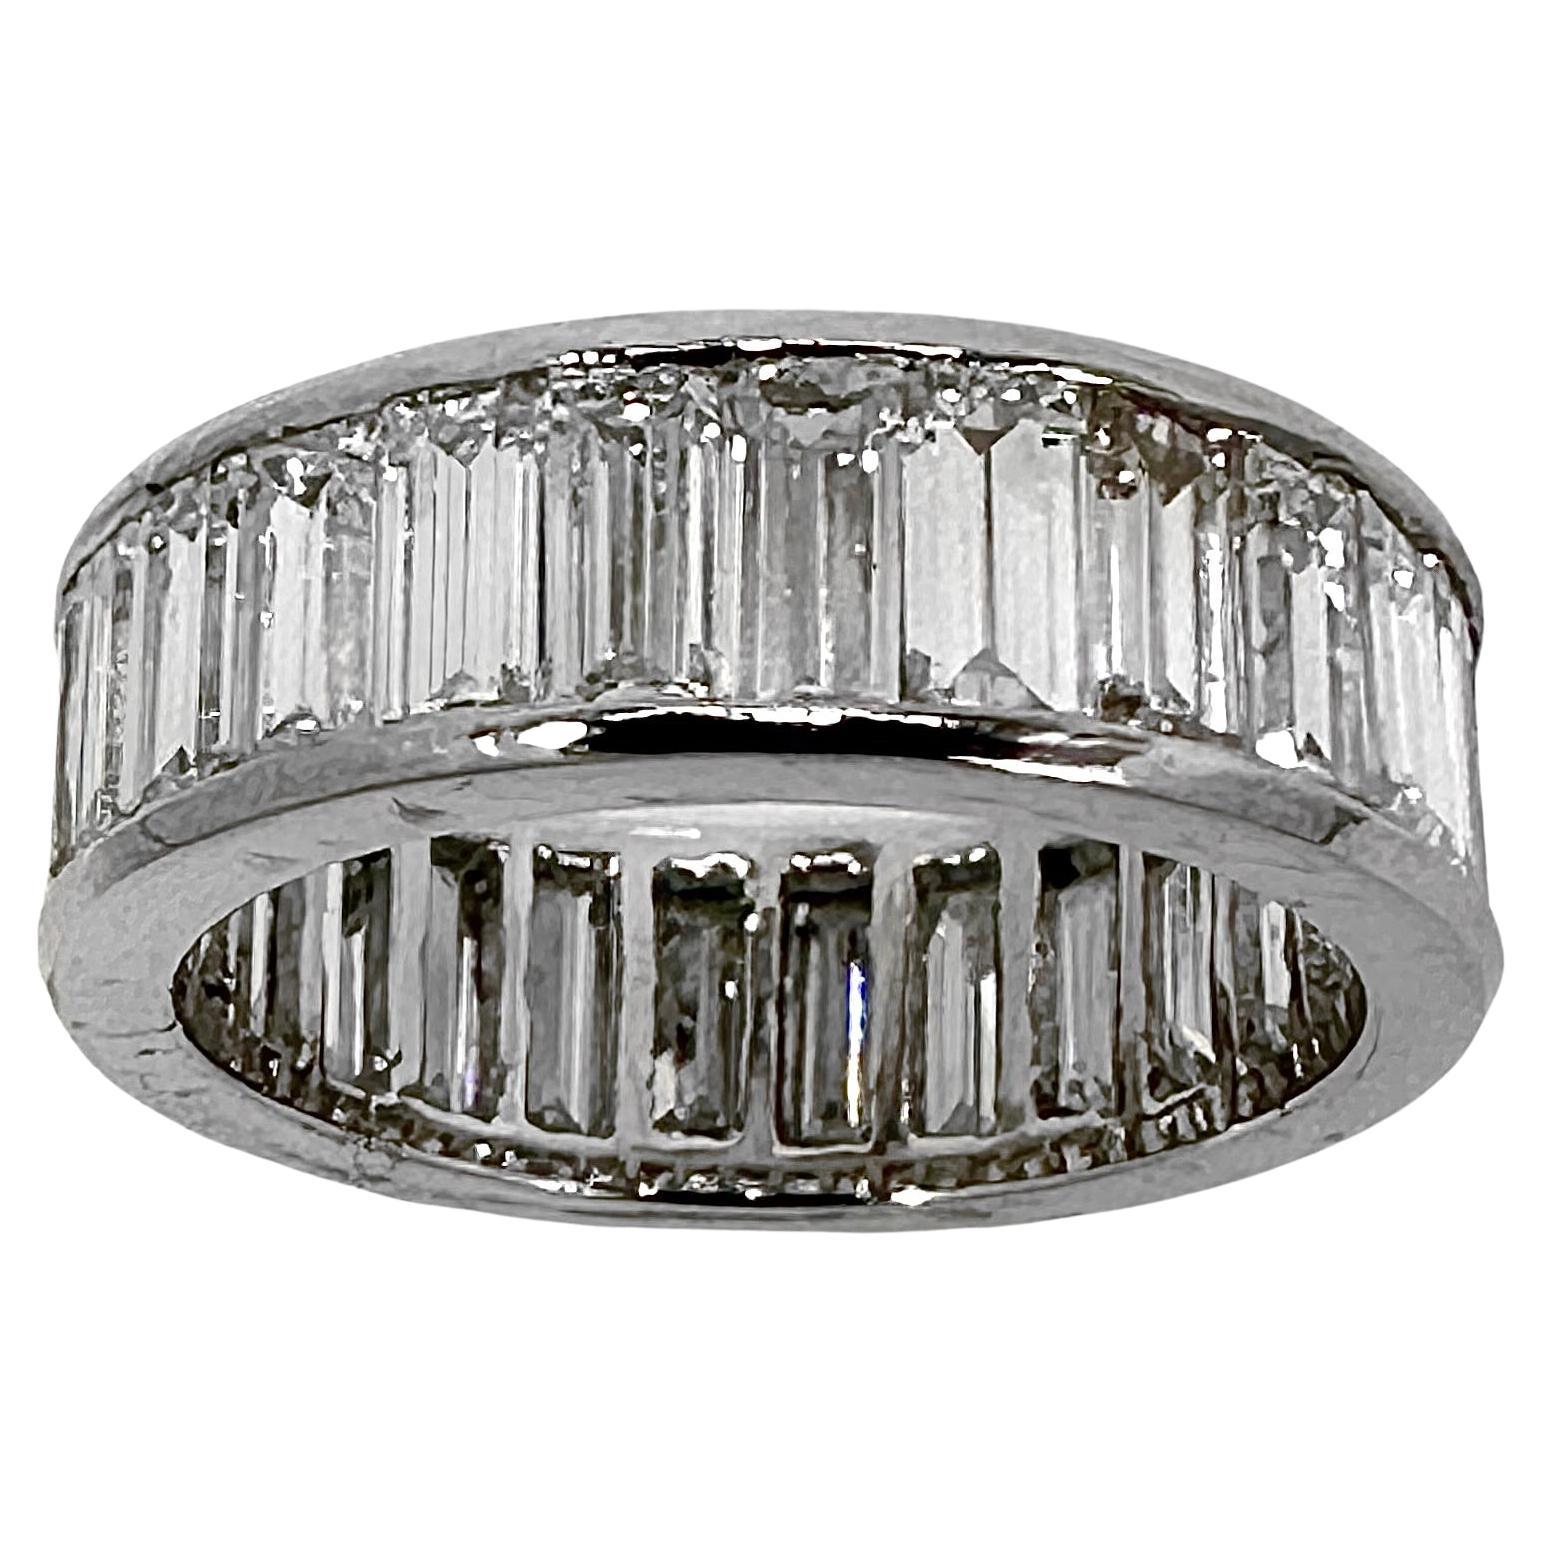 This beautifully crafted, handmade Mid-Century platinum eternity band is set all around with very large baguette cut diamonds. It is in excellent vintage condition, and is certain to deliver a lifetime of enjoyment. At a width of a full 1/4 inch,